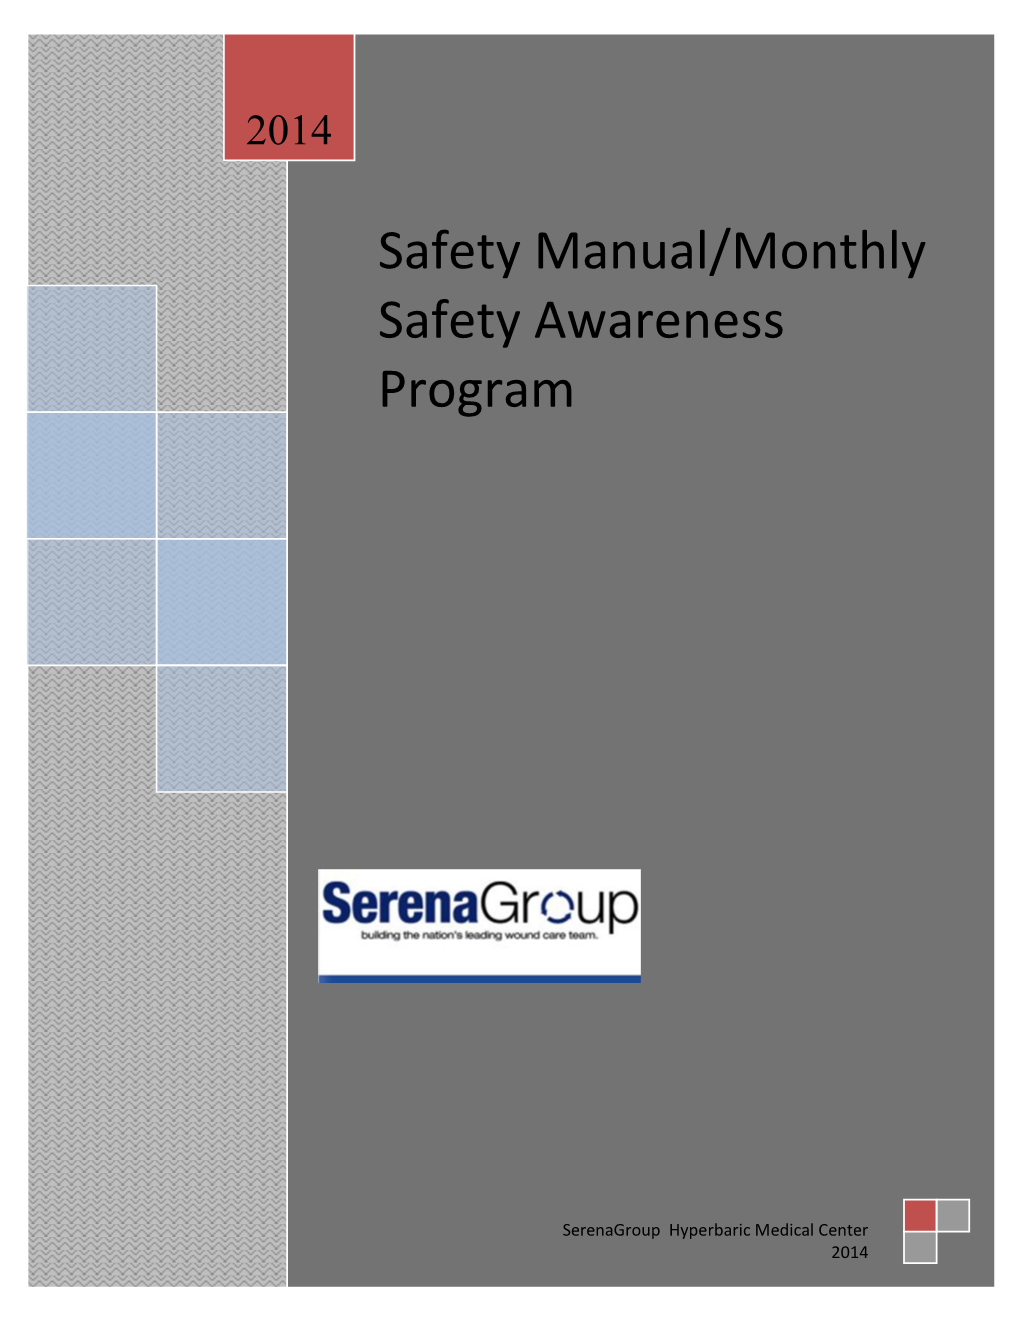 Safety Manual Program/Monthly Safety Awearness